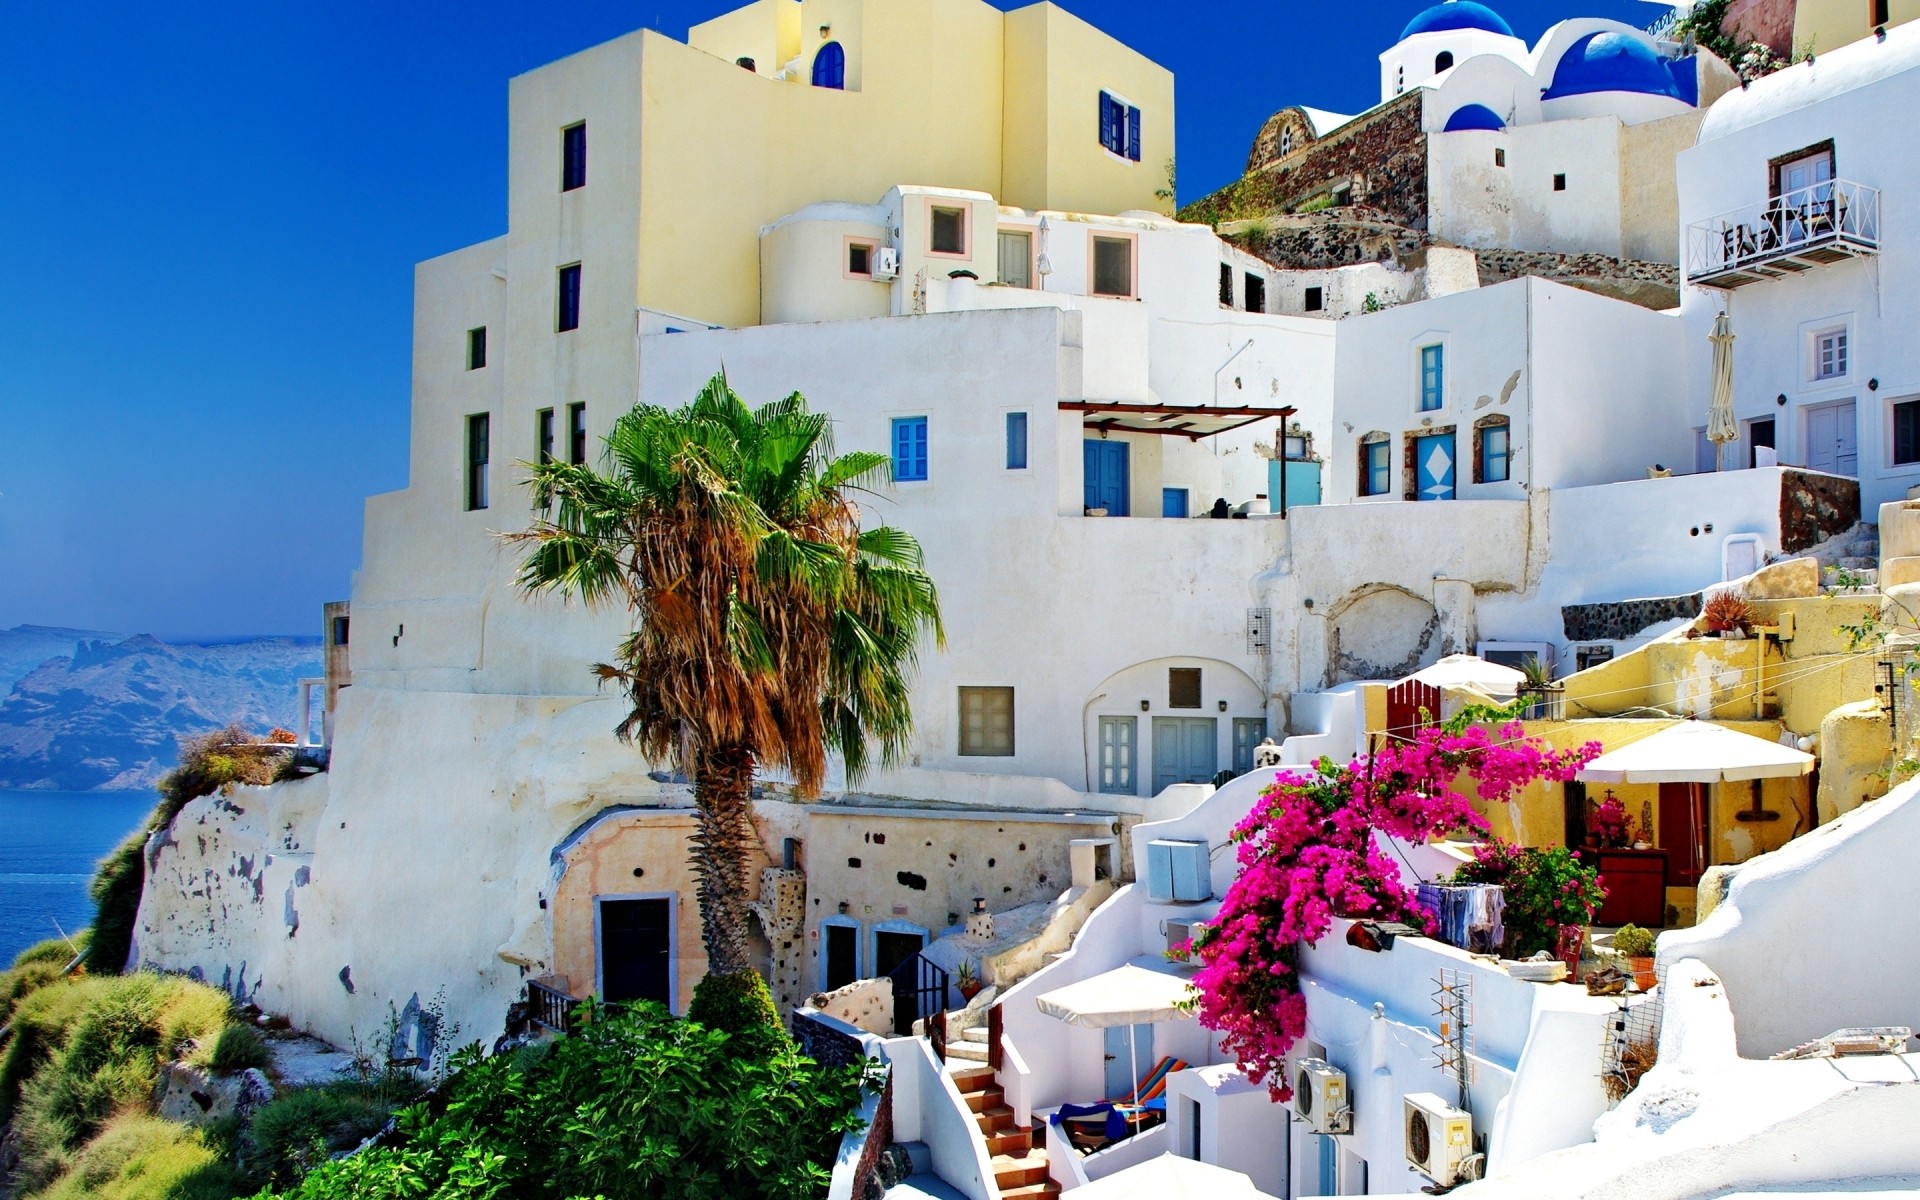 greece architecture travel house building outdoors town sky vacation tourism traditional family city summer sea seashore old sight palms santorini